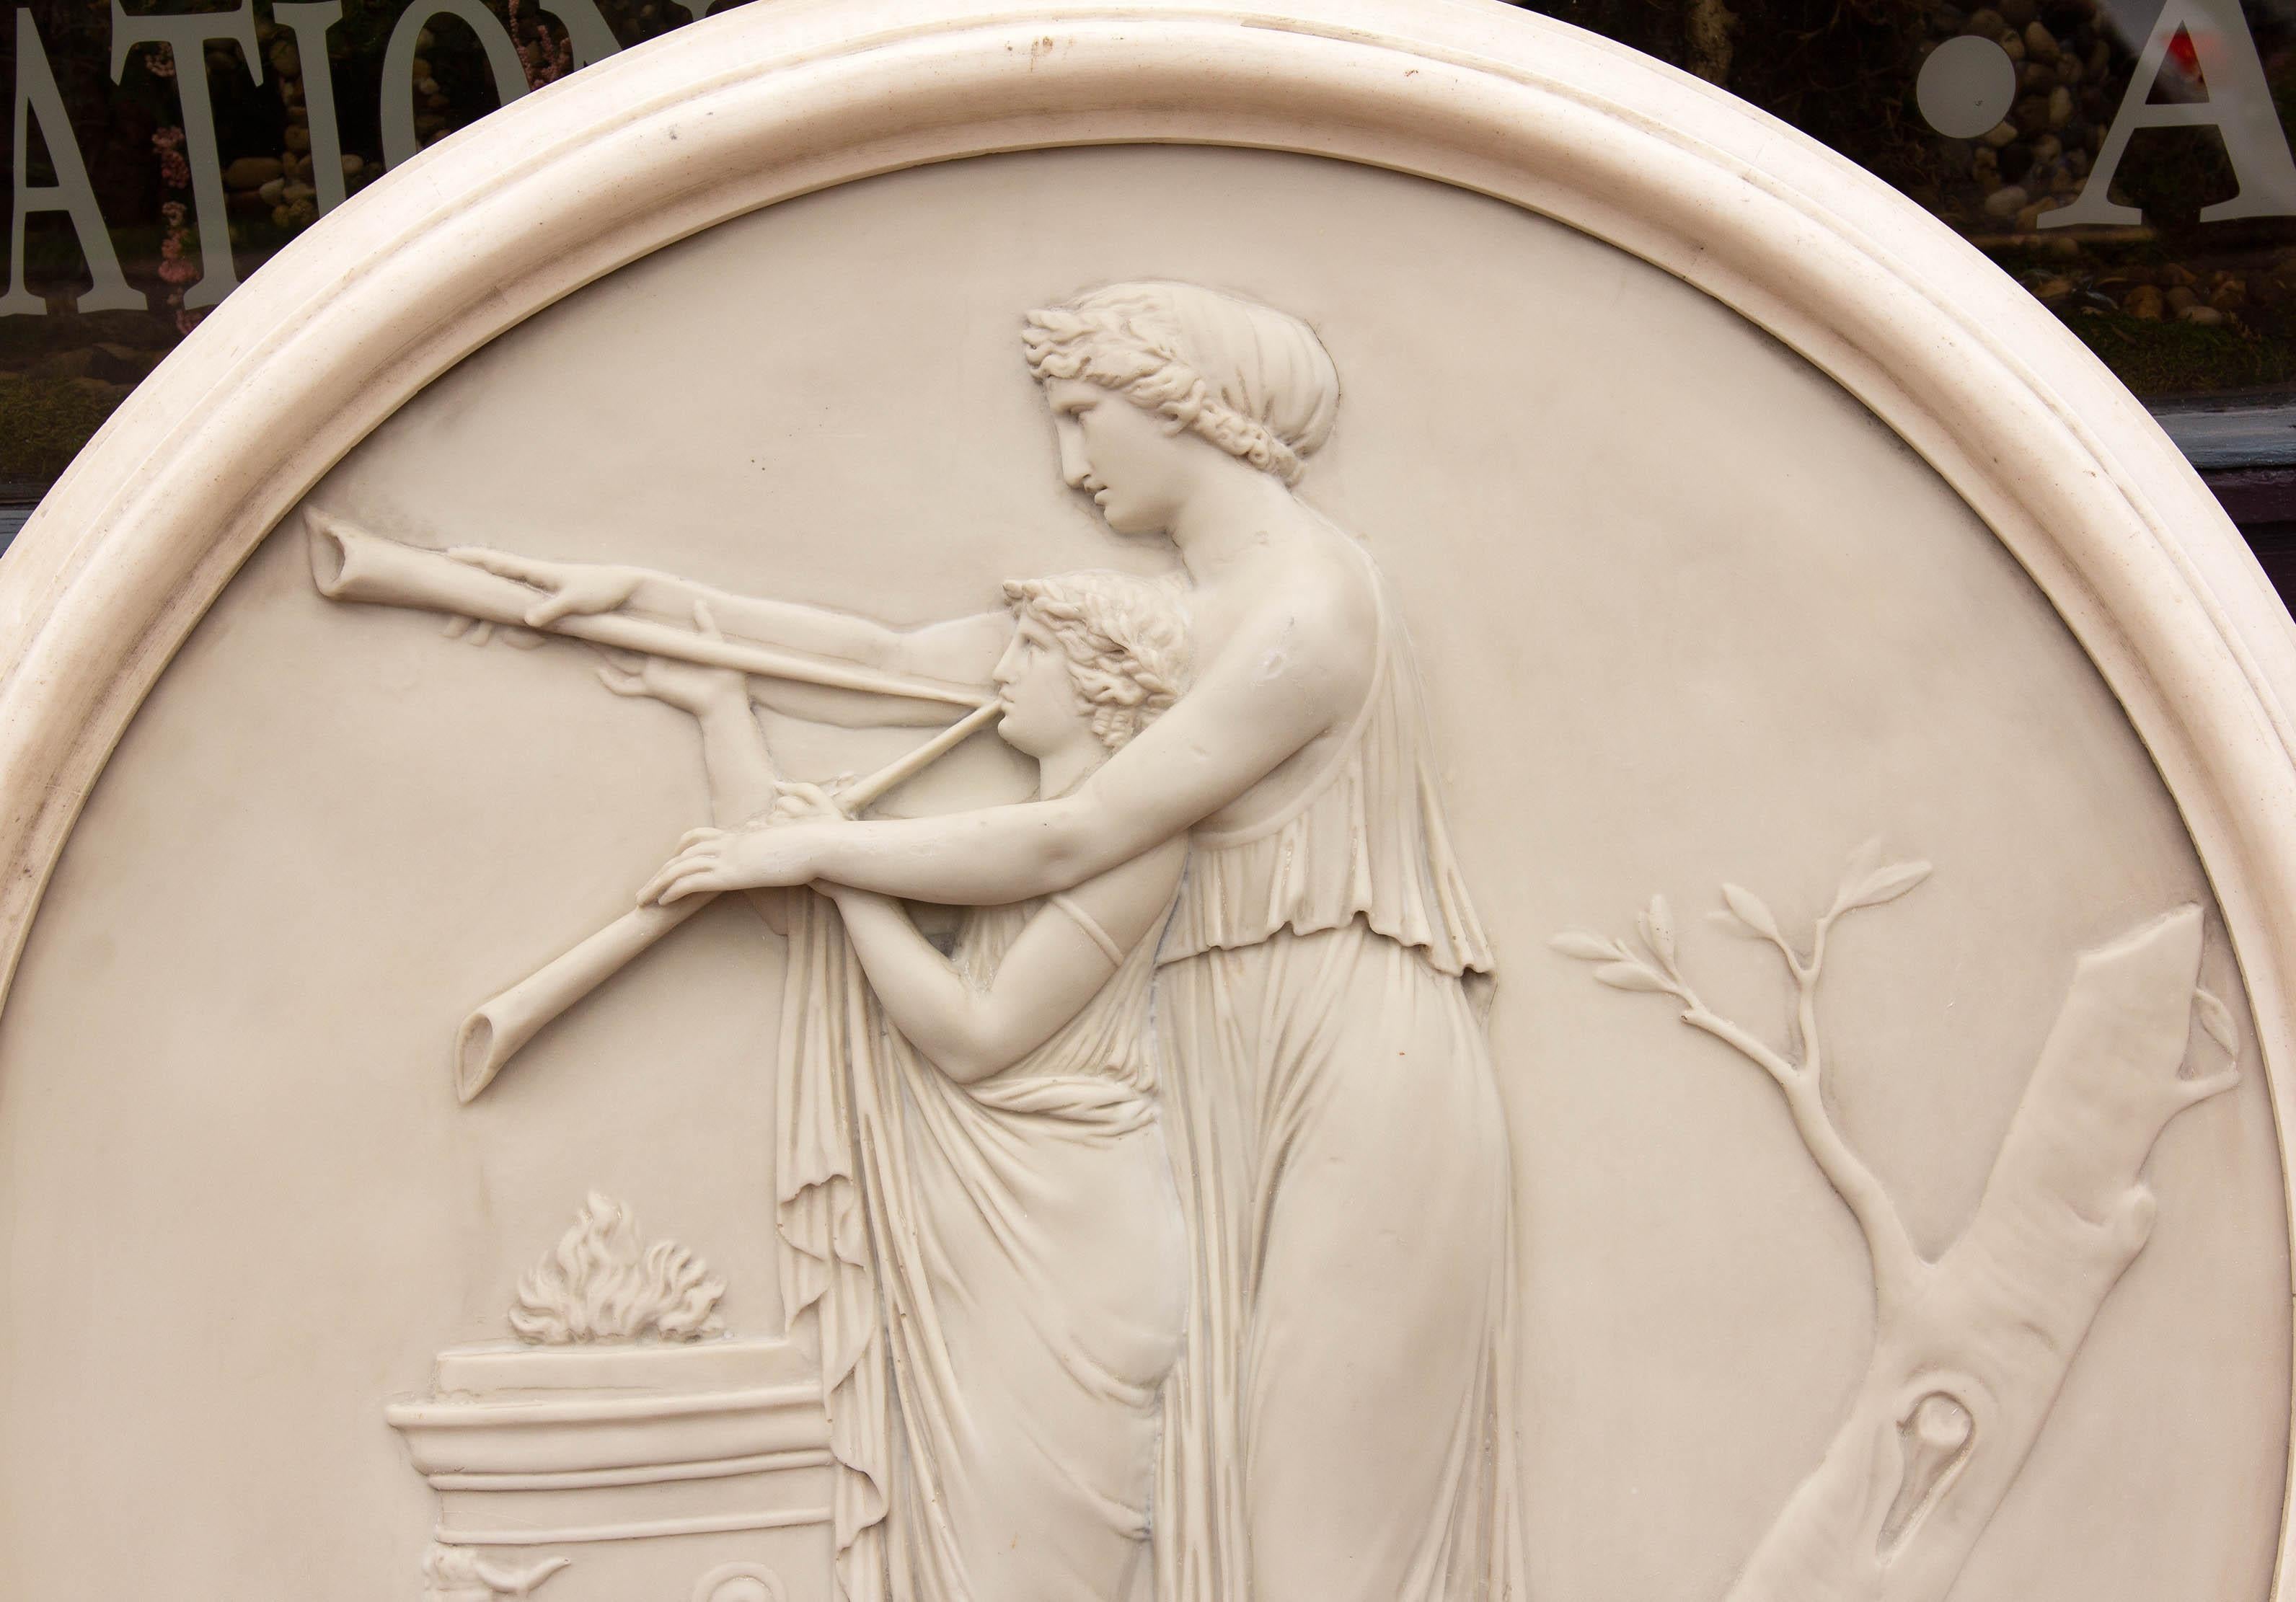 Classical Greek roundel wall sculpture. Faux marble. Quality cast resin, mid-20th century.